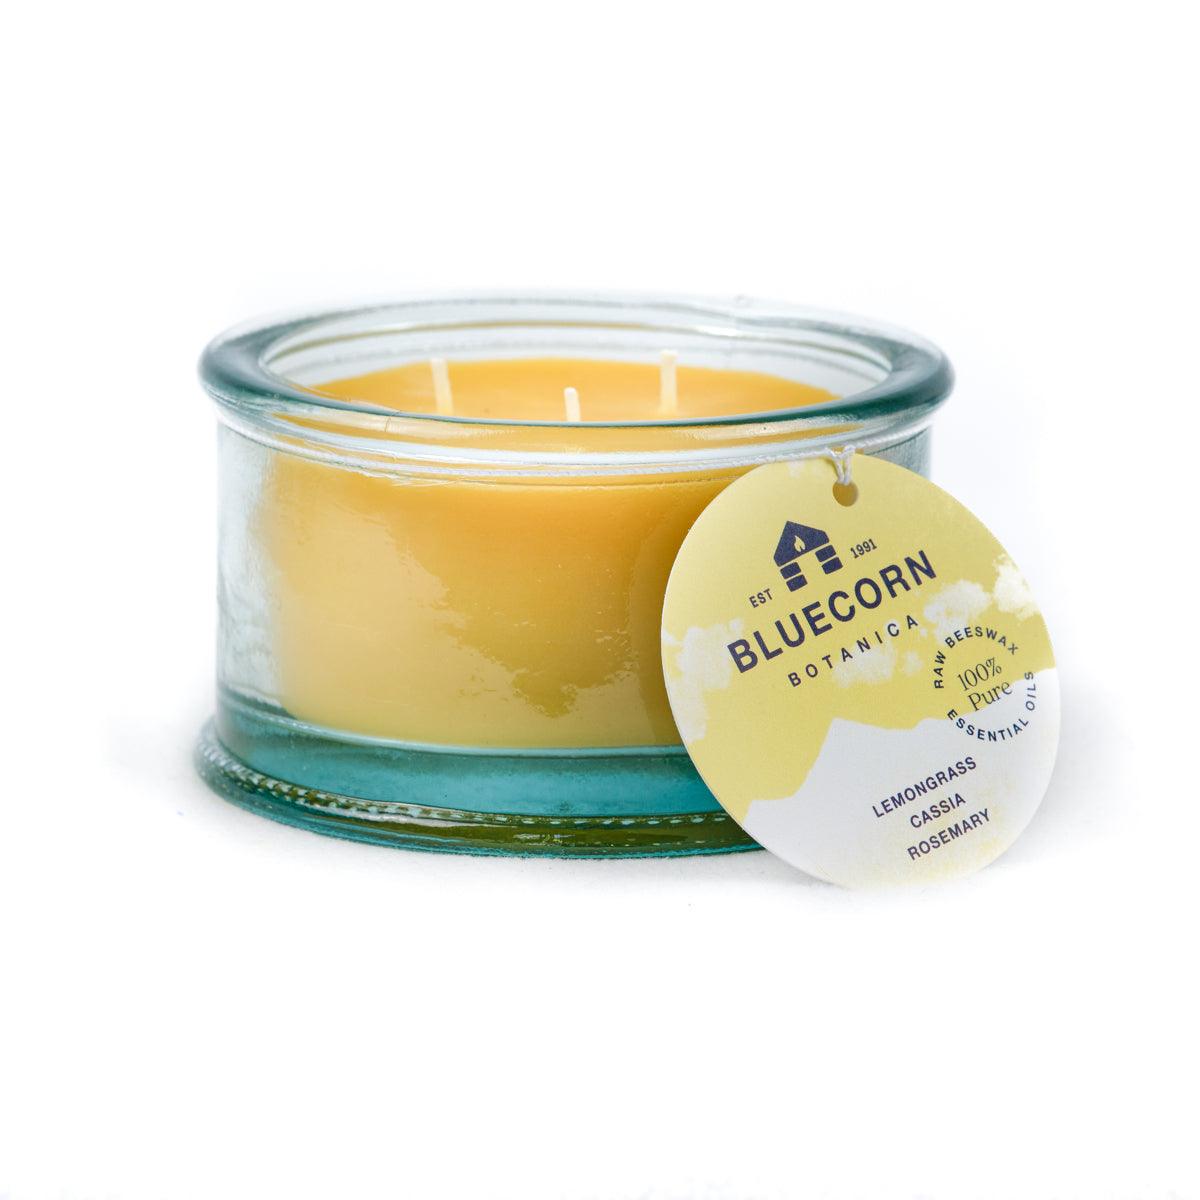 Candle - Hand Made Beewax Candle- Scent Unscented